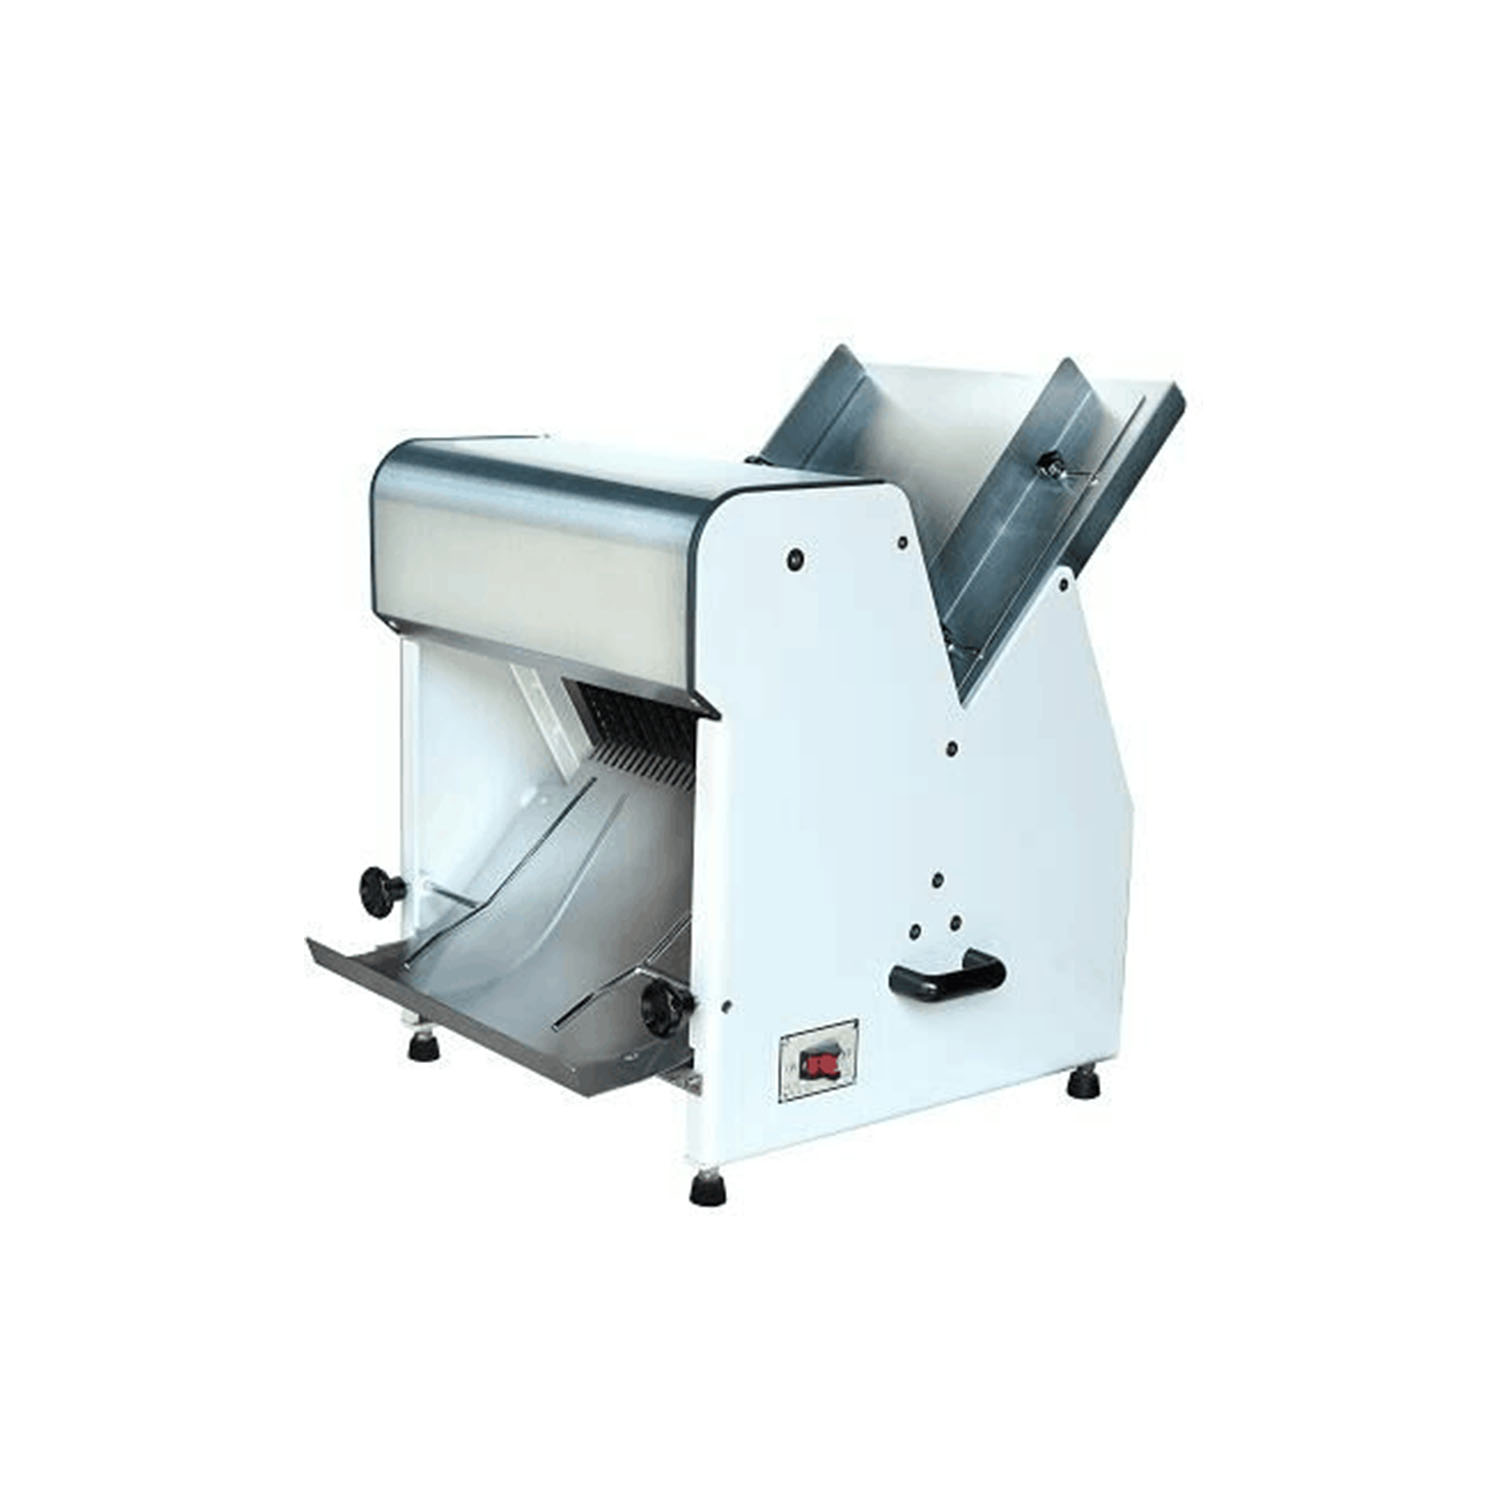 https://media.twothousand.com/catalog/product/c/o/commercial_electric_bread_slicer.jpg